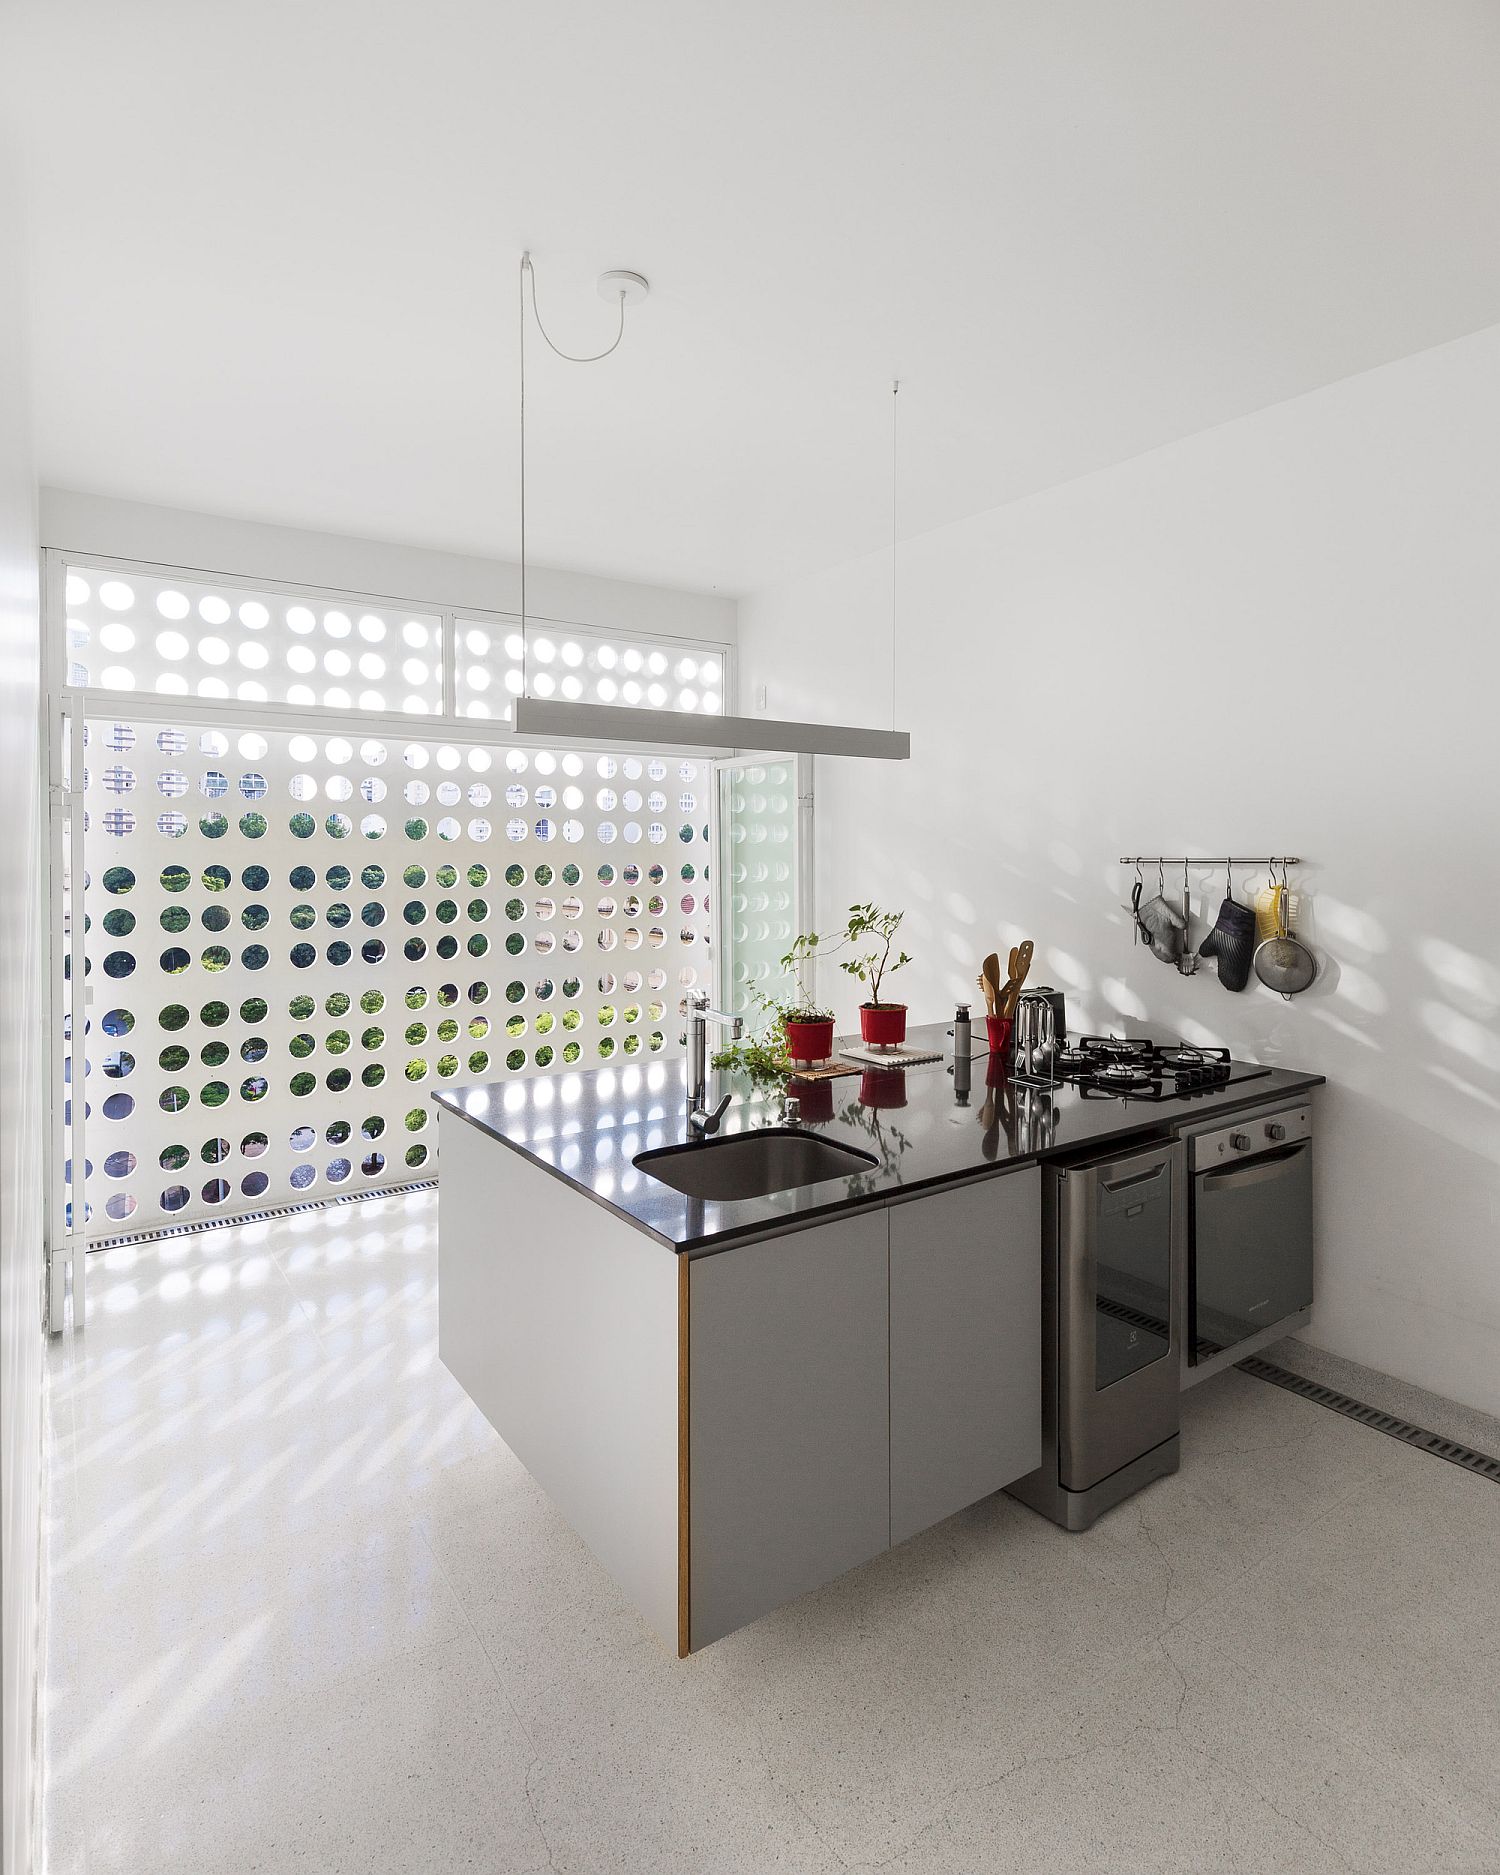 Concrete wall with circular cutouts brings light into the kitchen